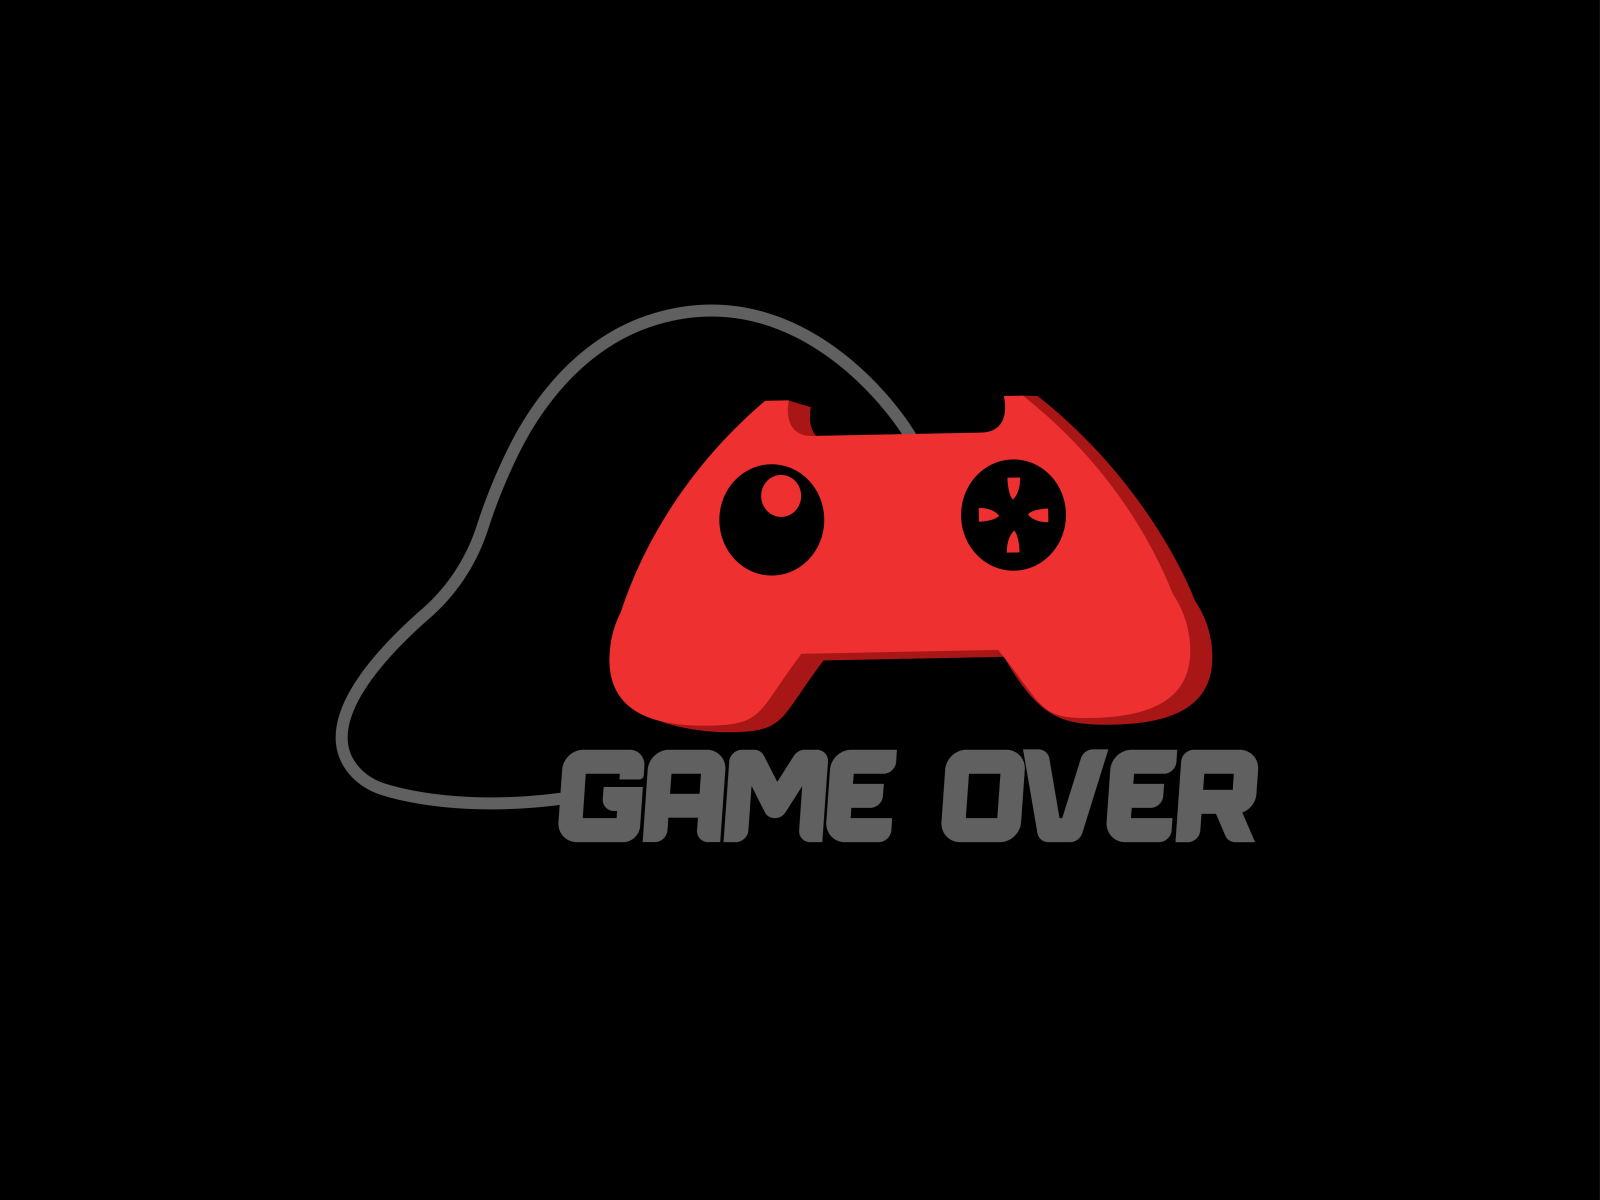 Game over by Sami on Dribbble